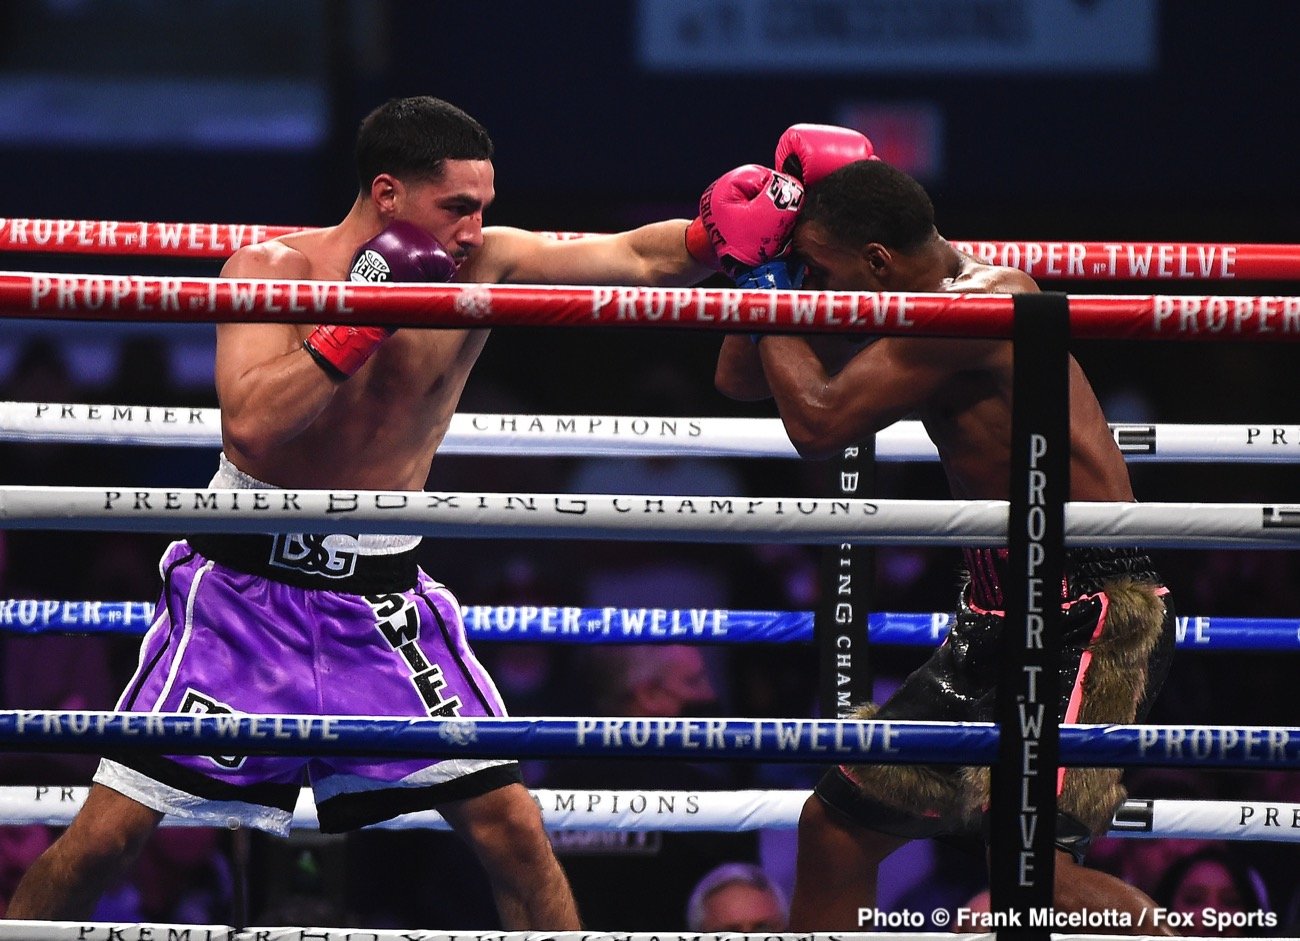 Image: Danny Garcia fighting in February or March at 154